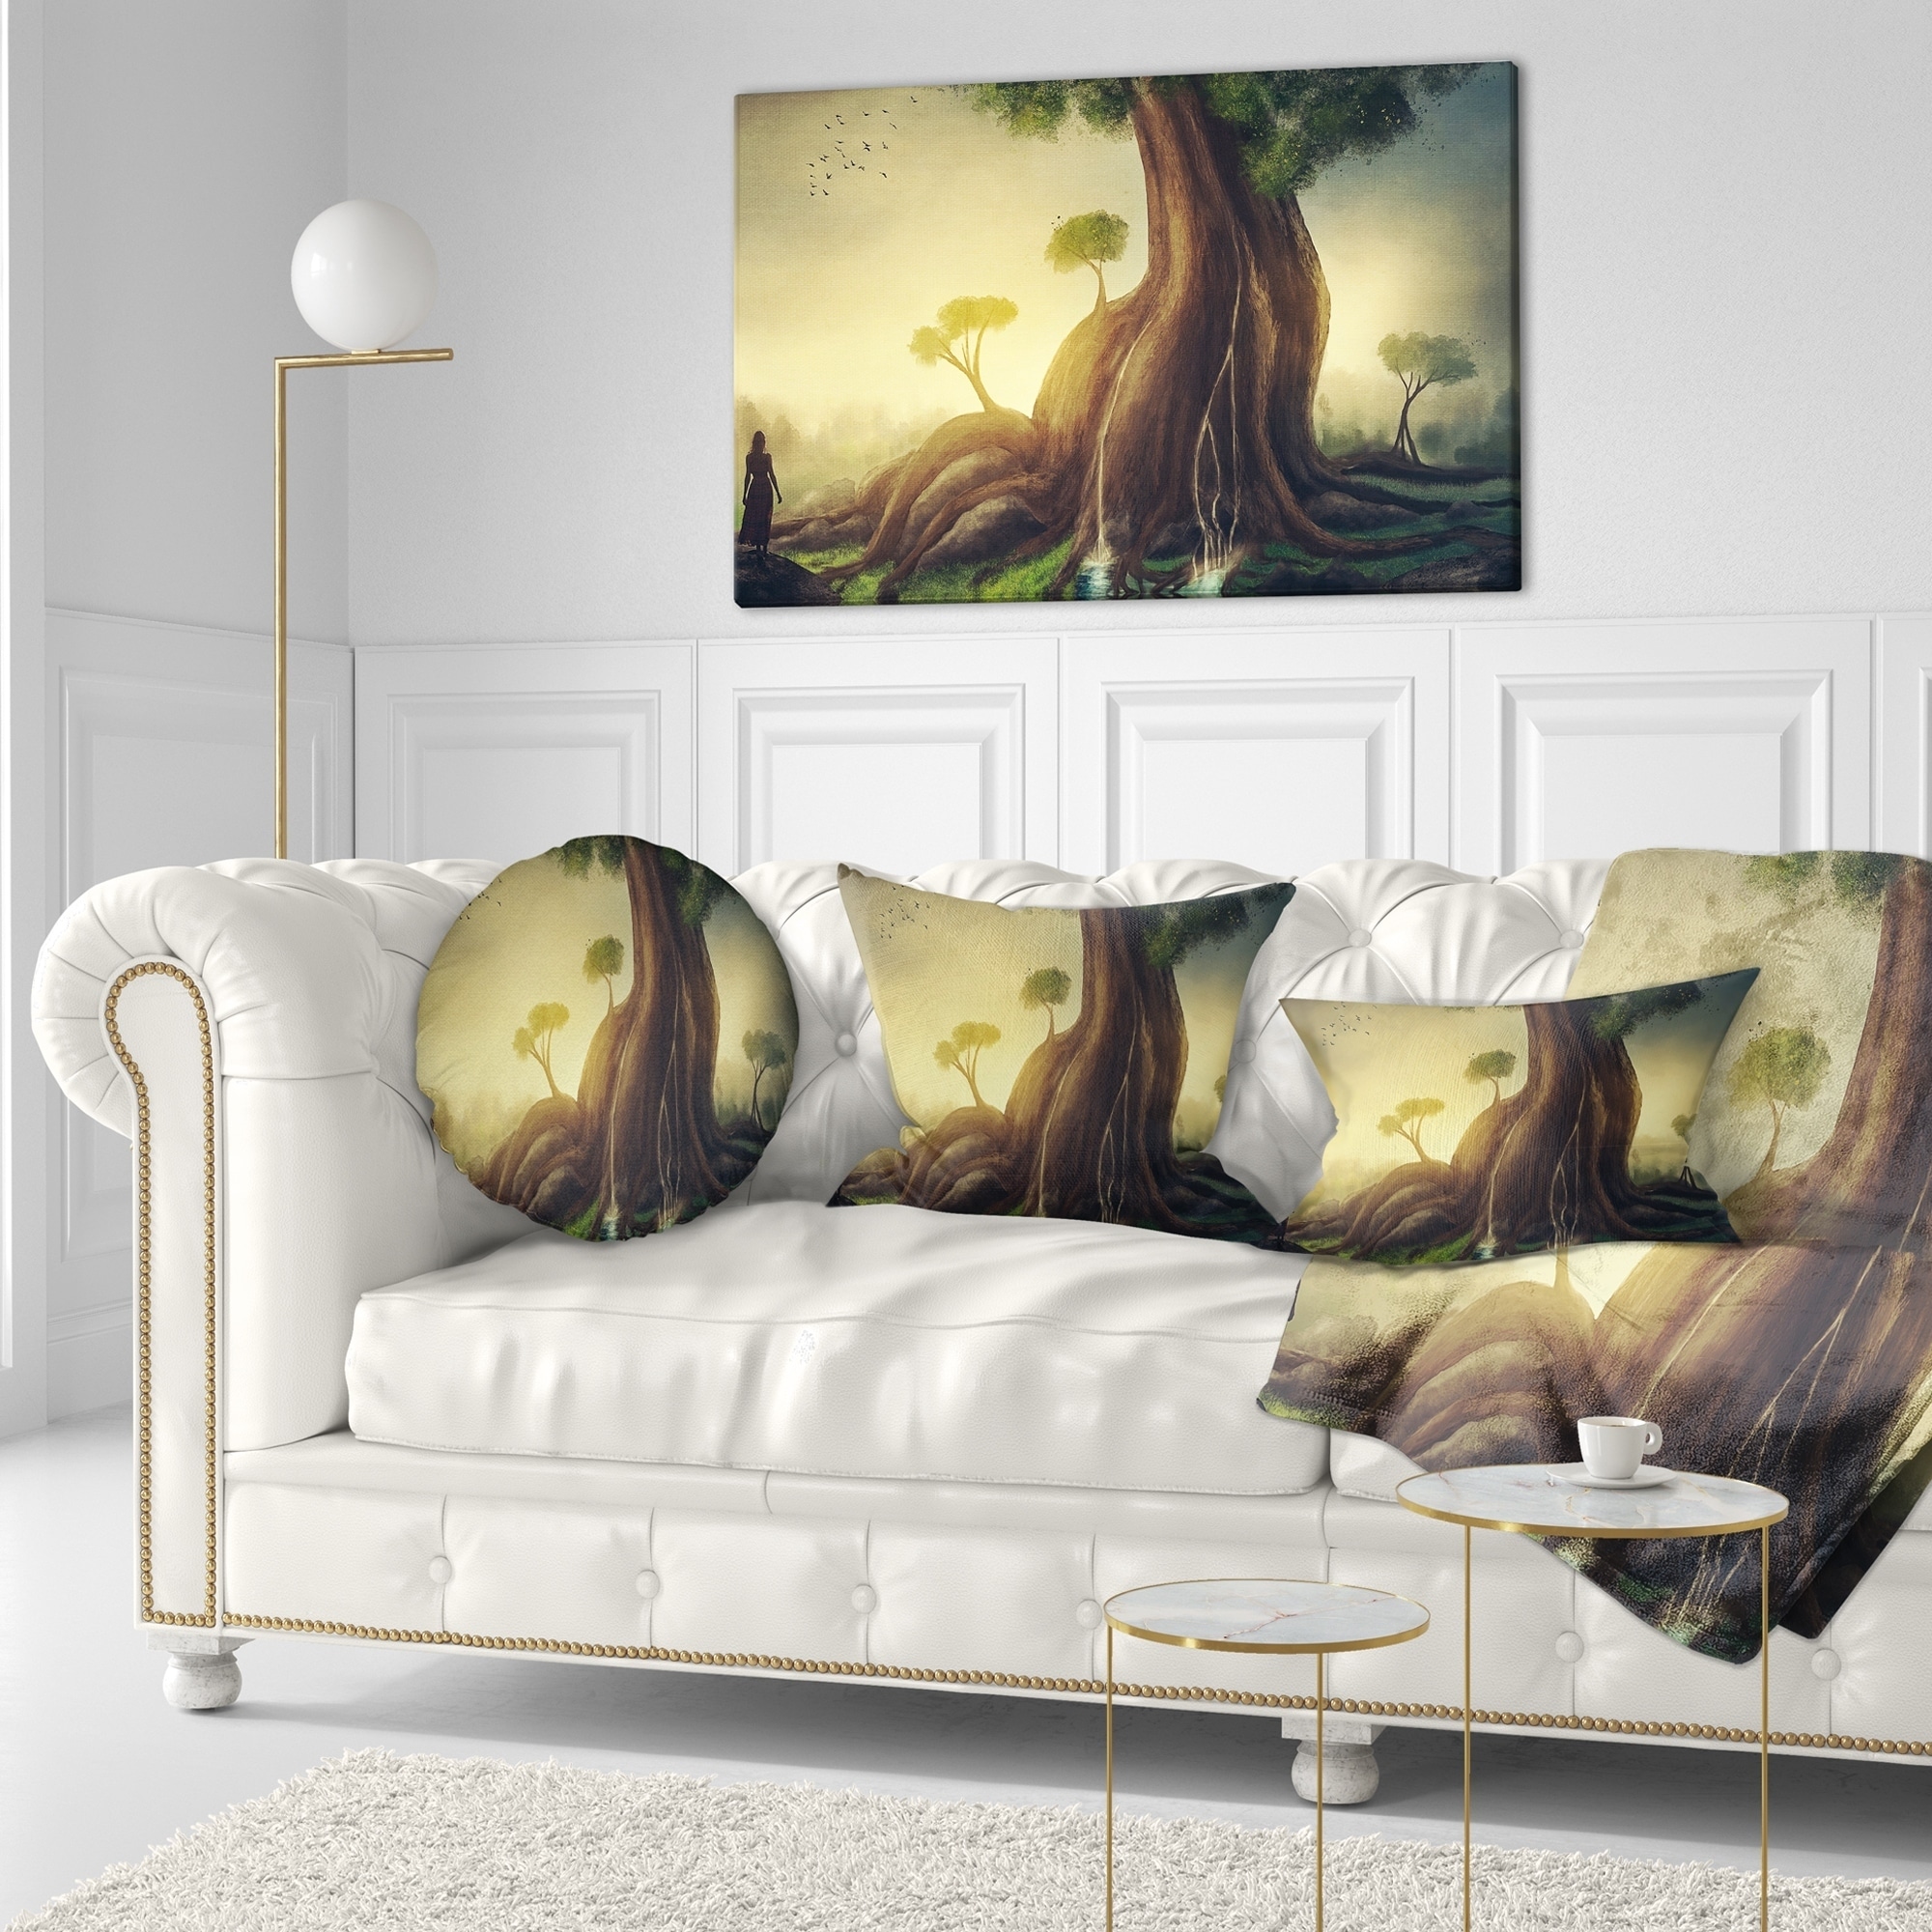 Designart Giant Tree with Woman - Abstract Throw Pillow - 18x18